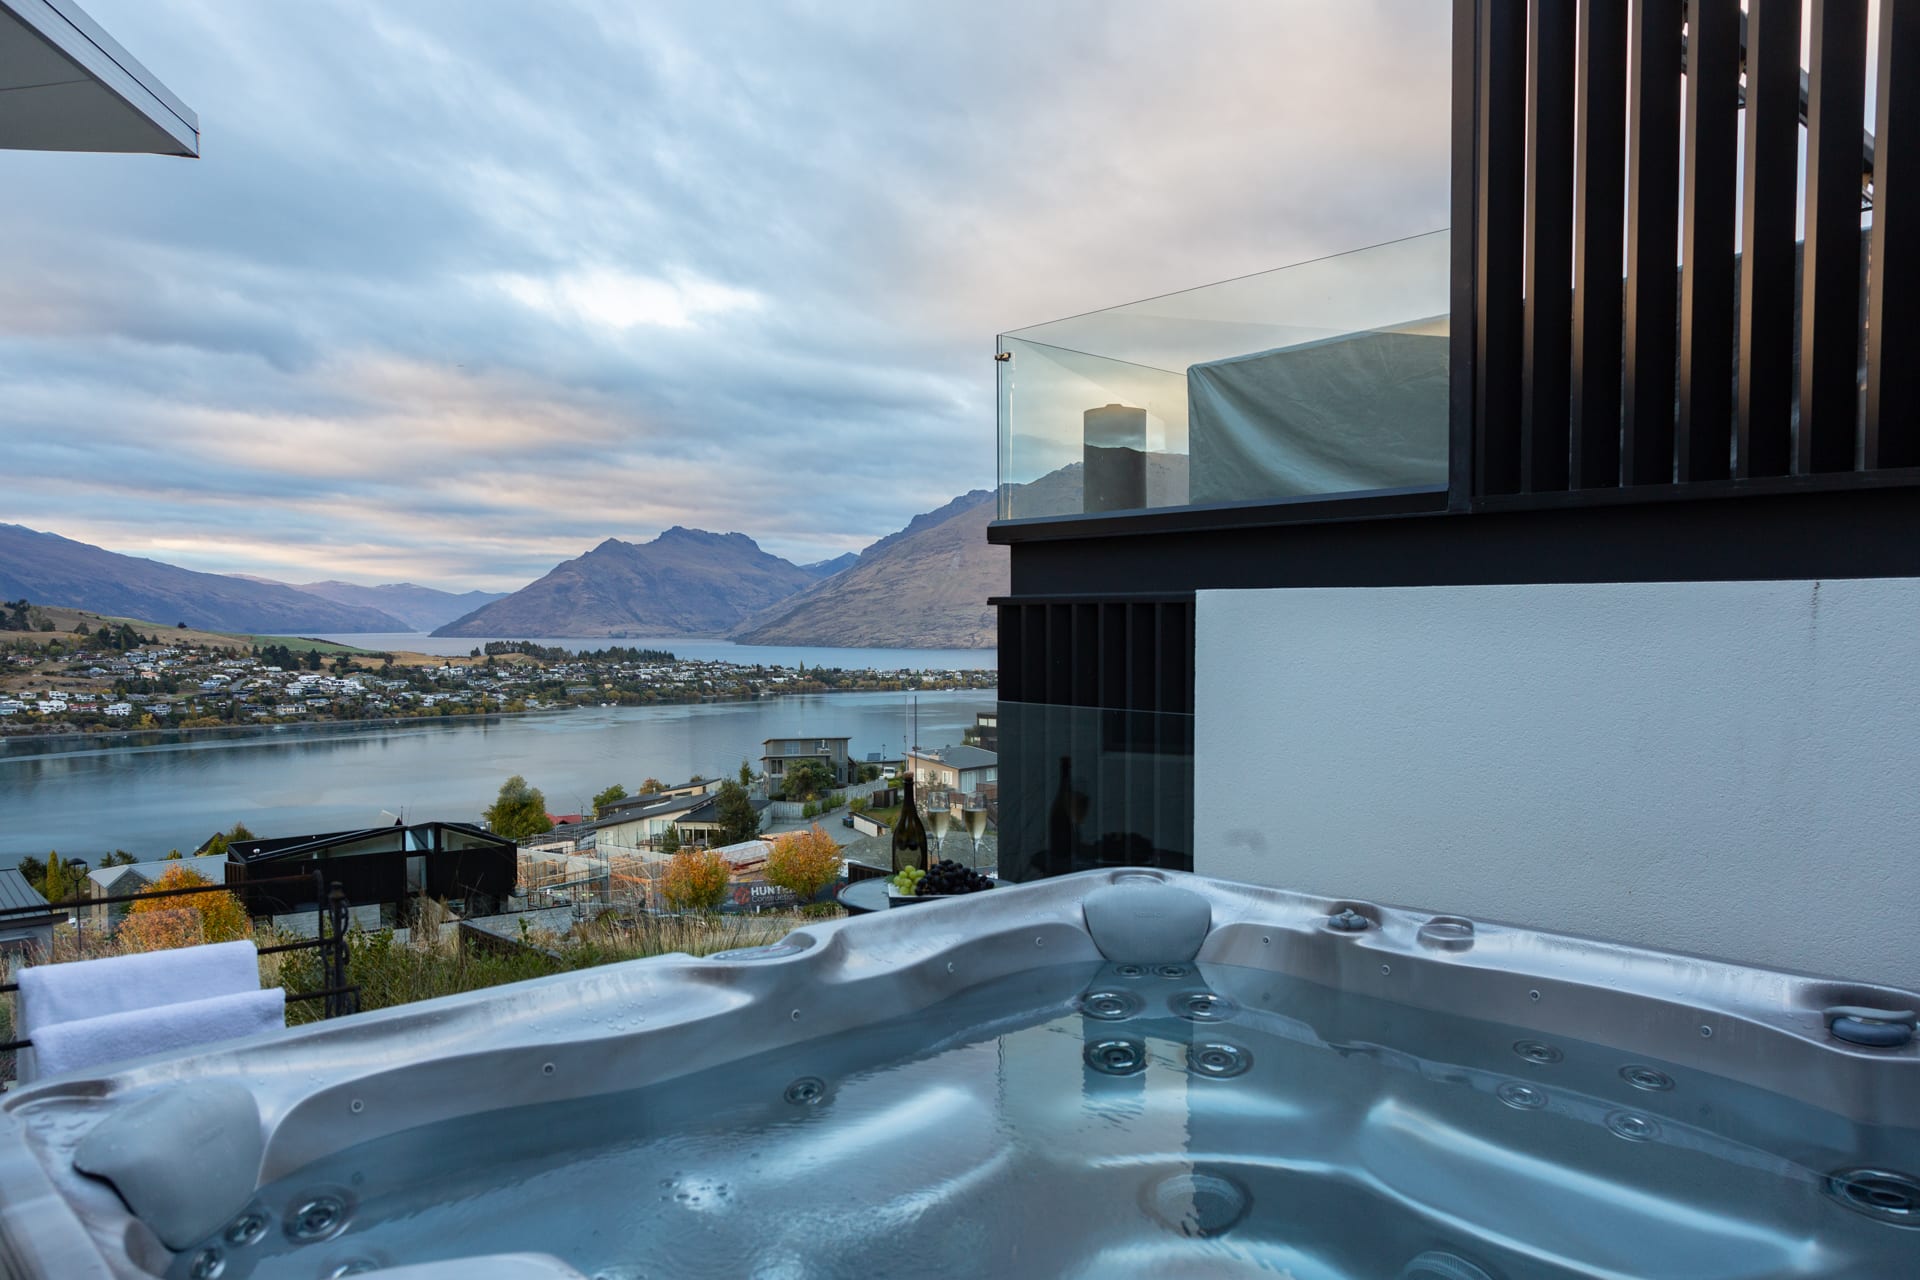 Sensational views from the hot tub